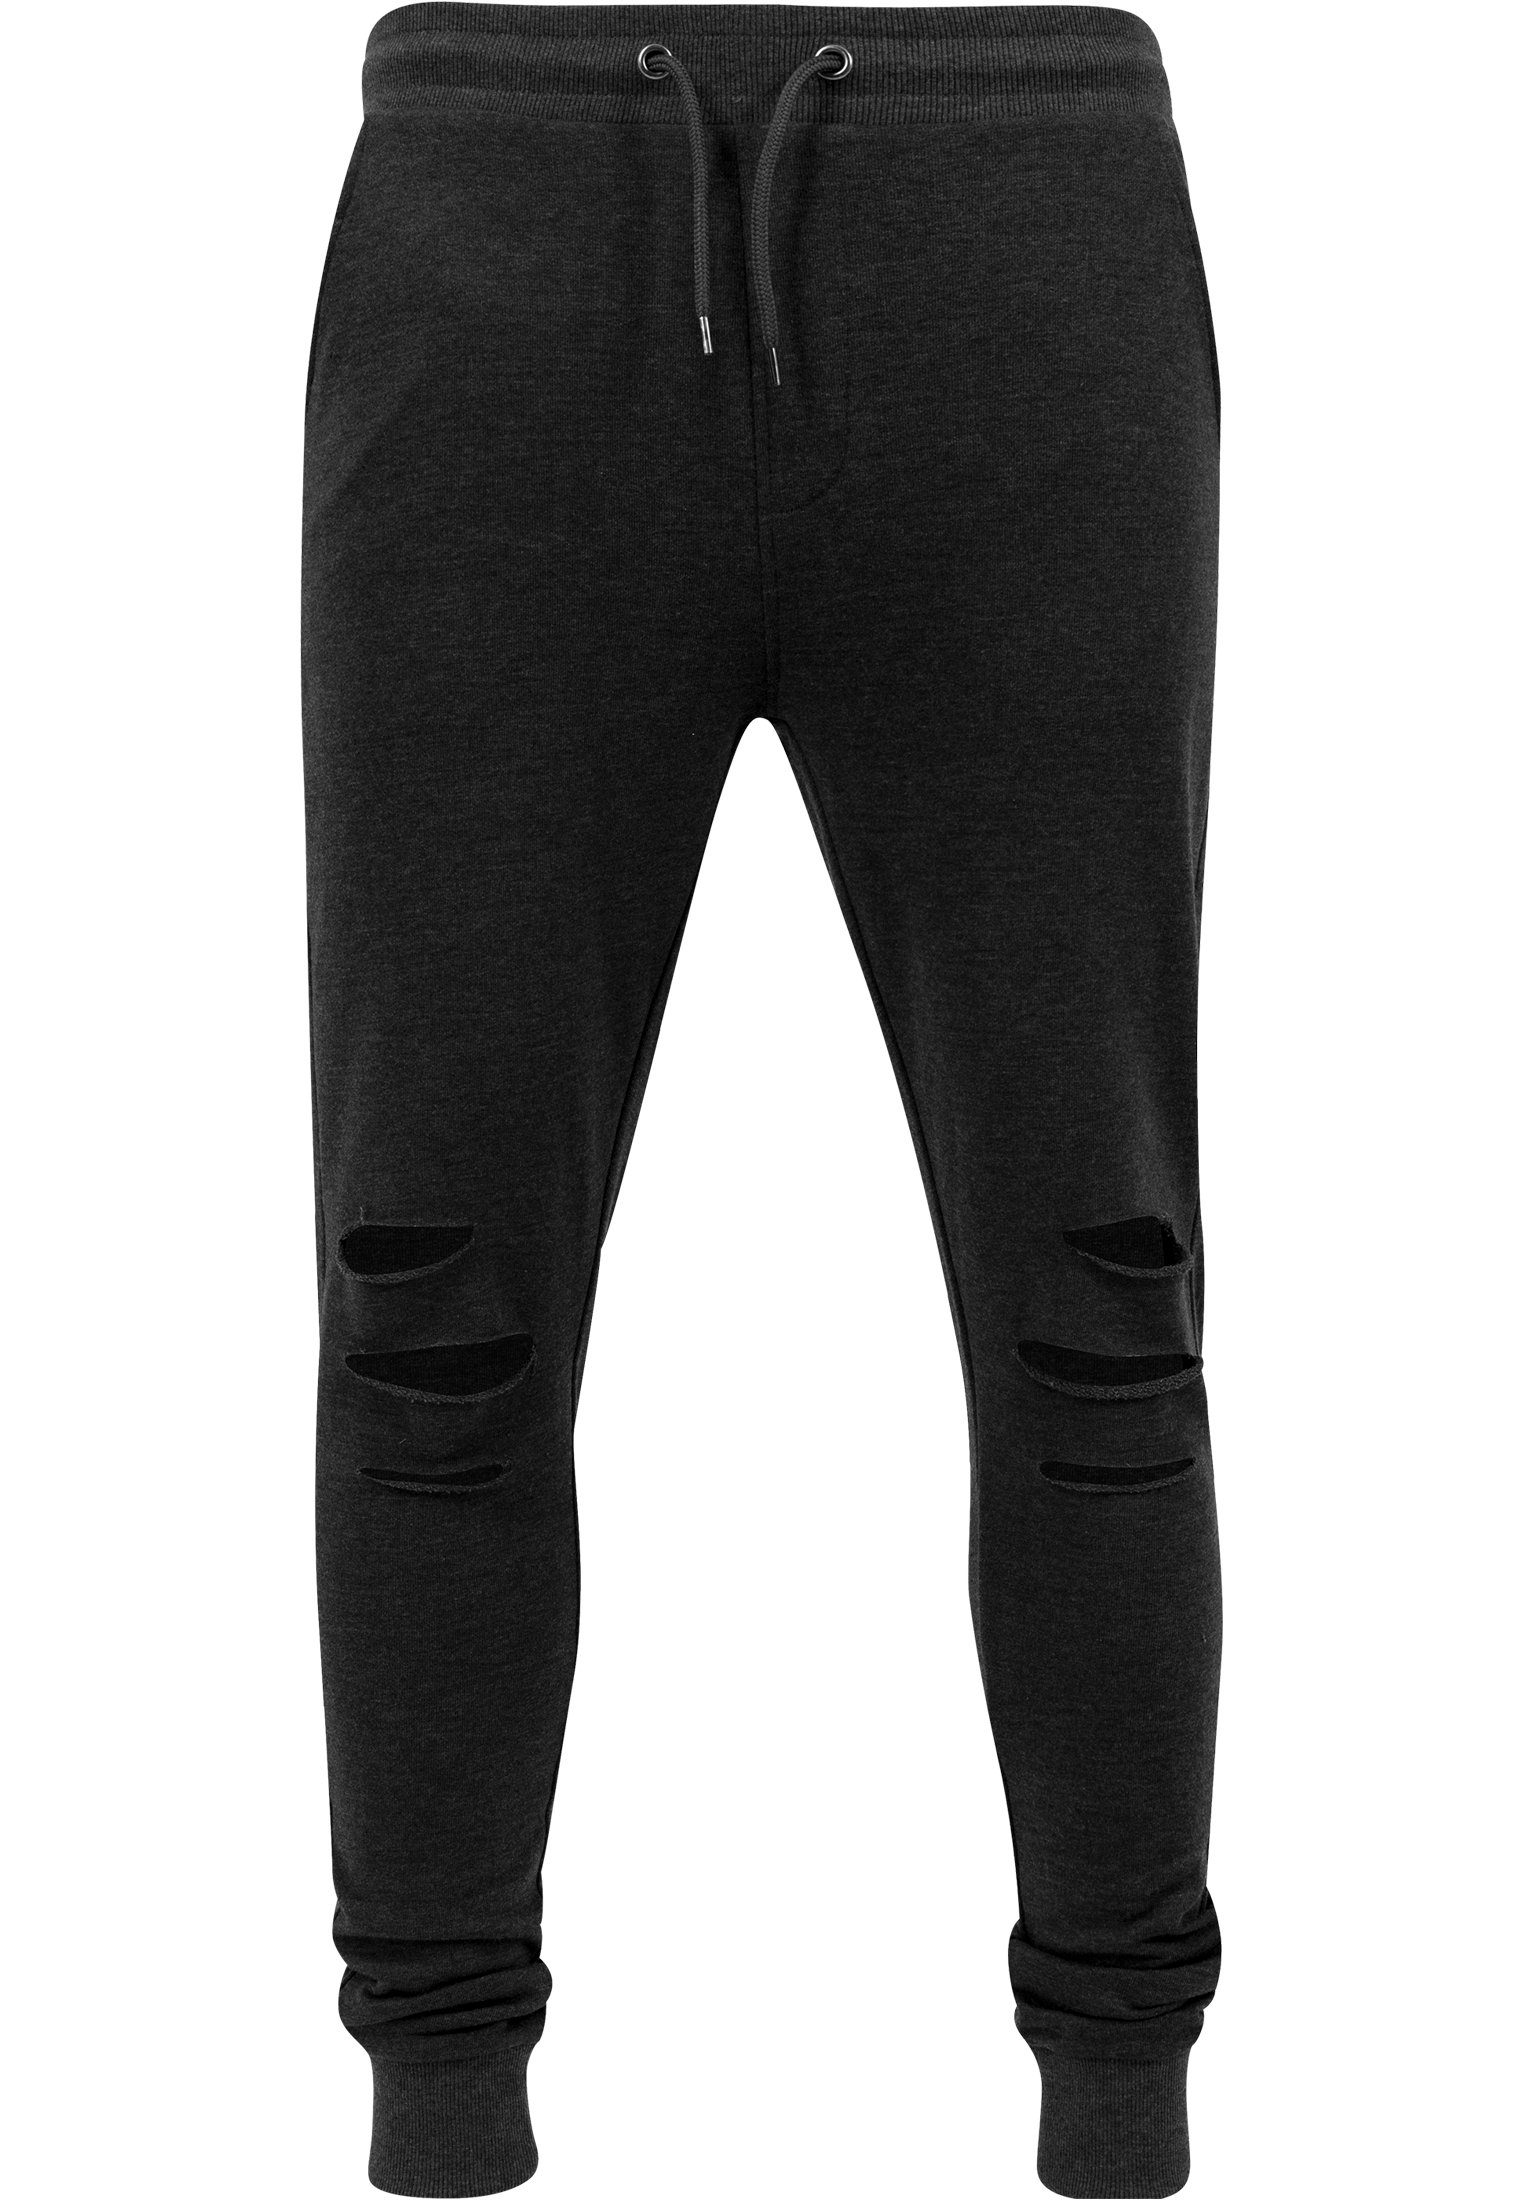 Stoffhose Terry charcoal URBAN CLASSICS TB1385 Cutted